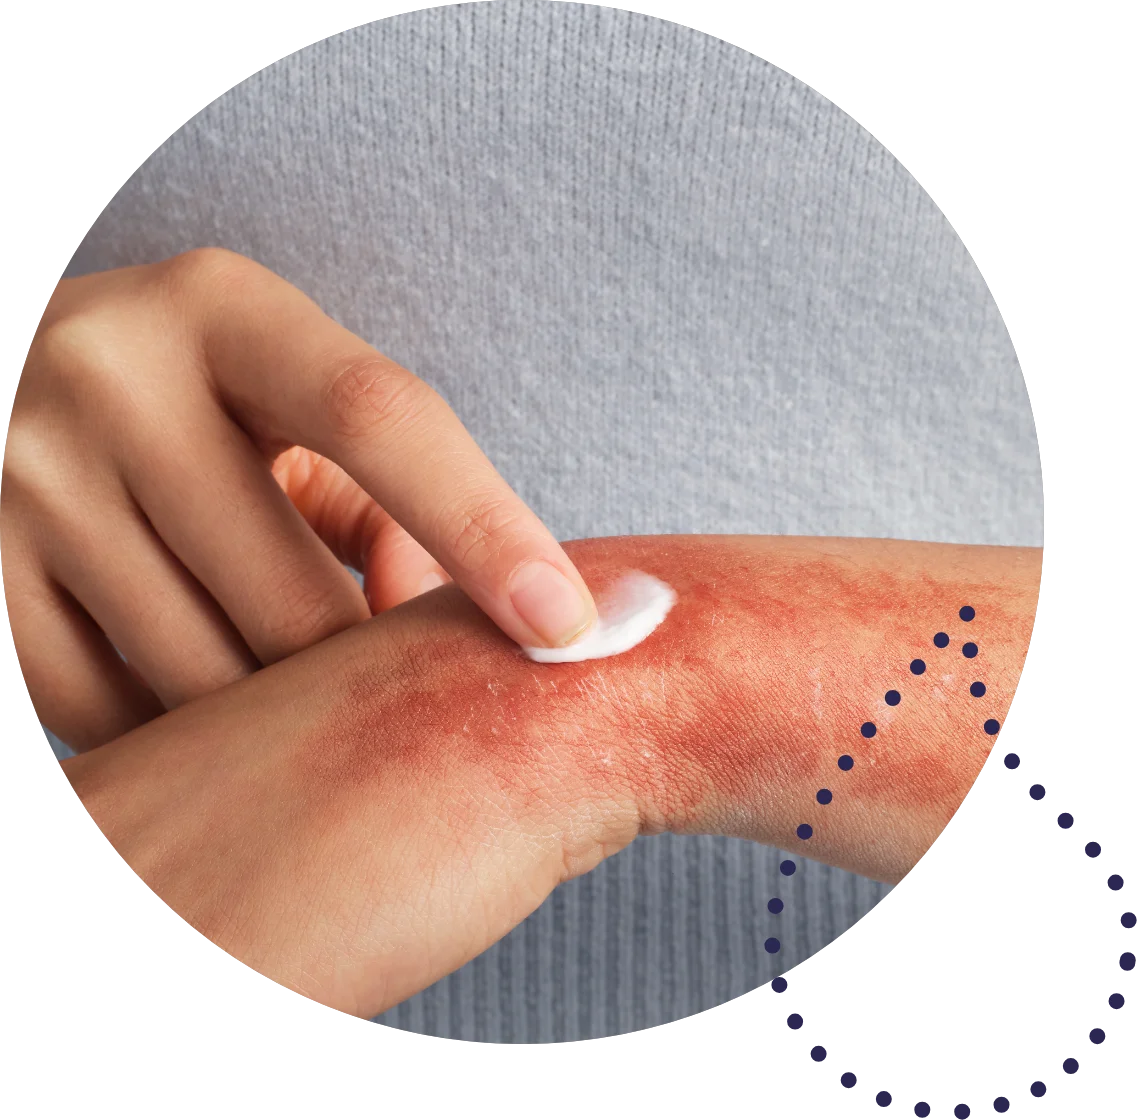 Patient experiencing redness and itching on the wrist